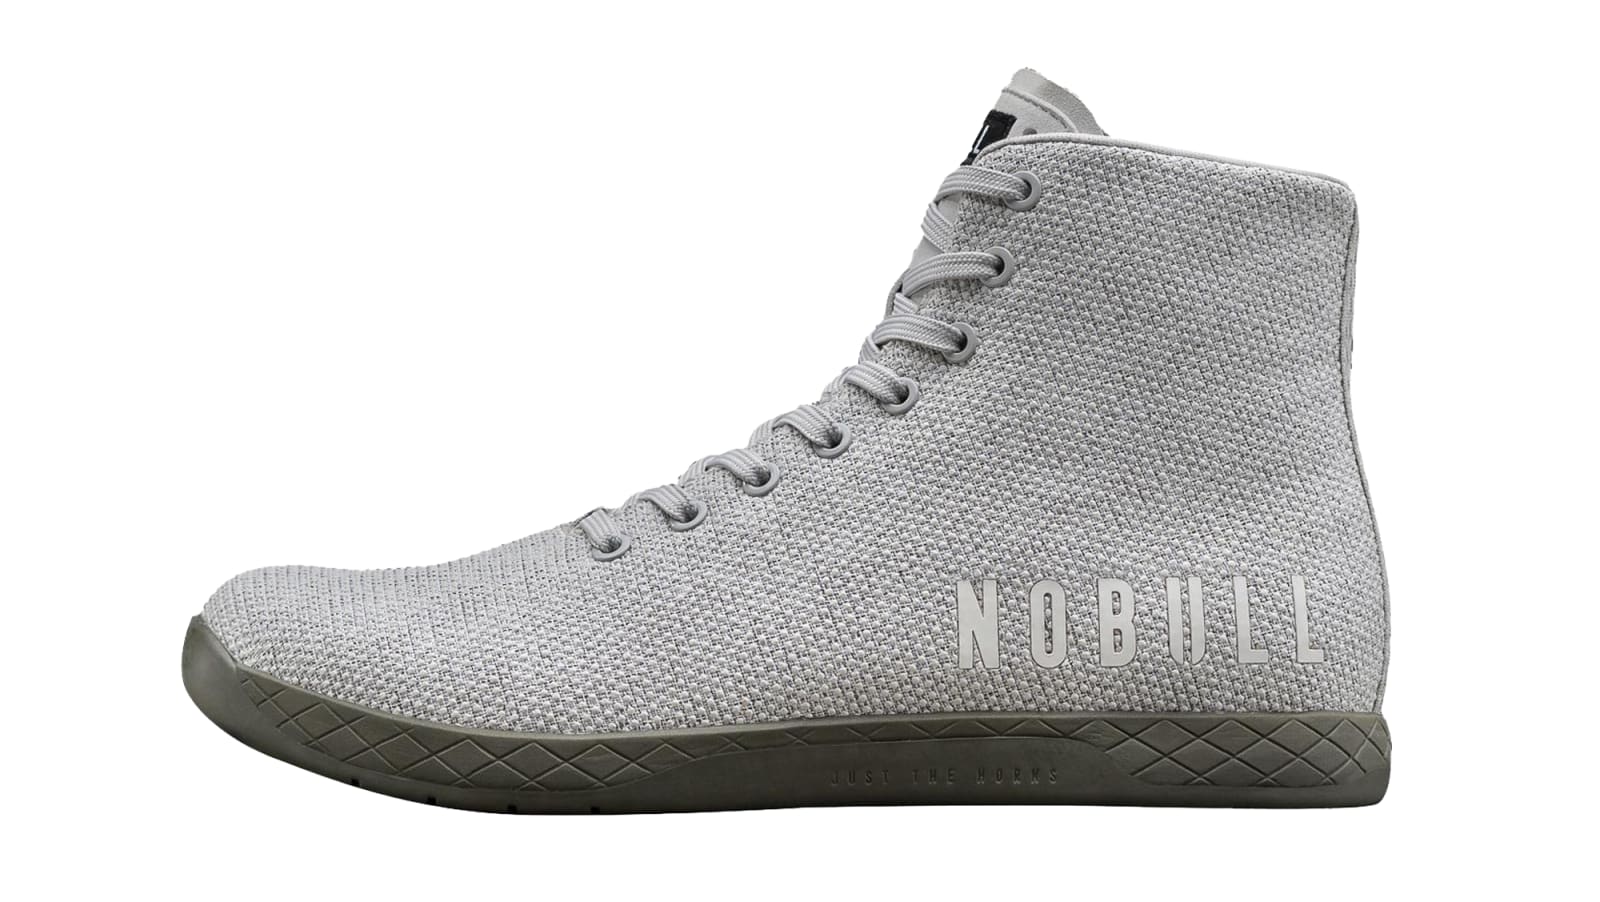 NOBULL High-Top Trainer+ Review